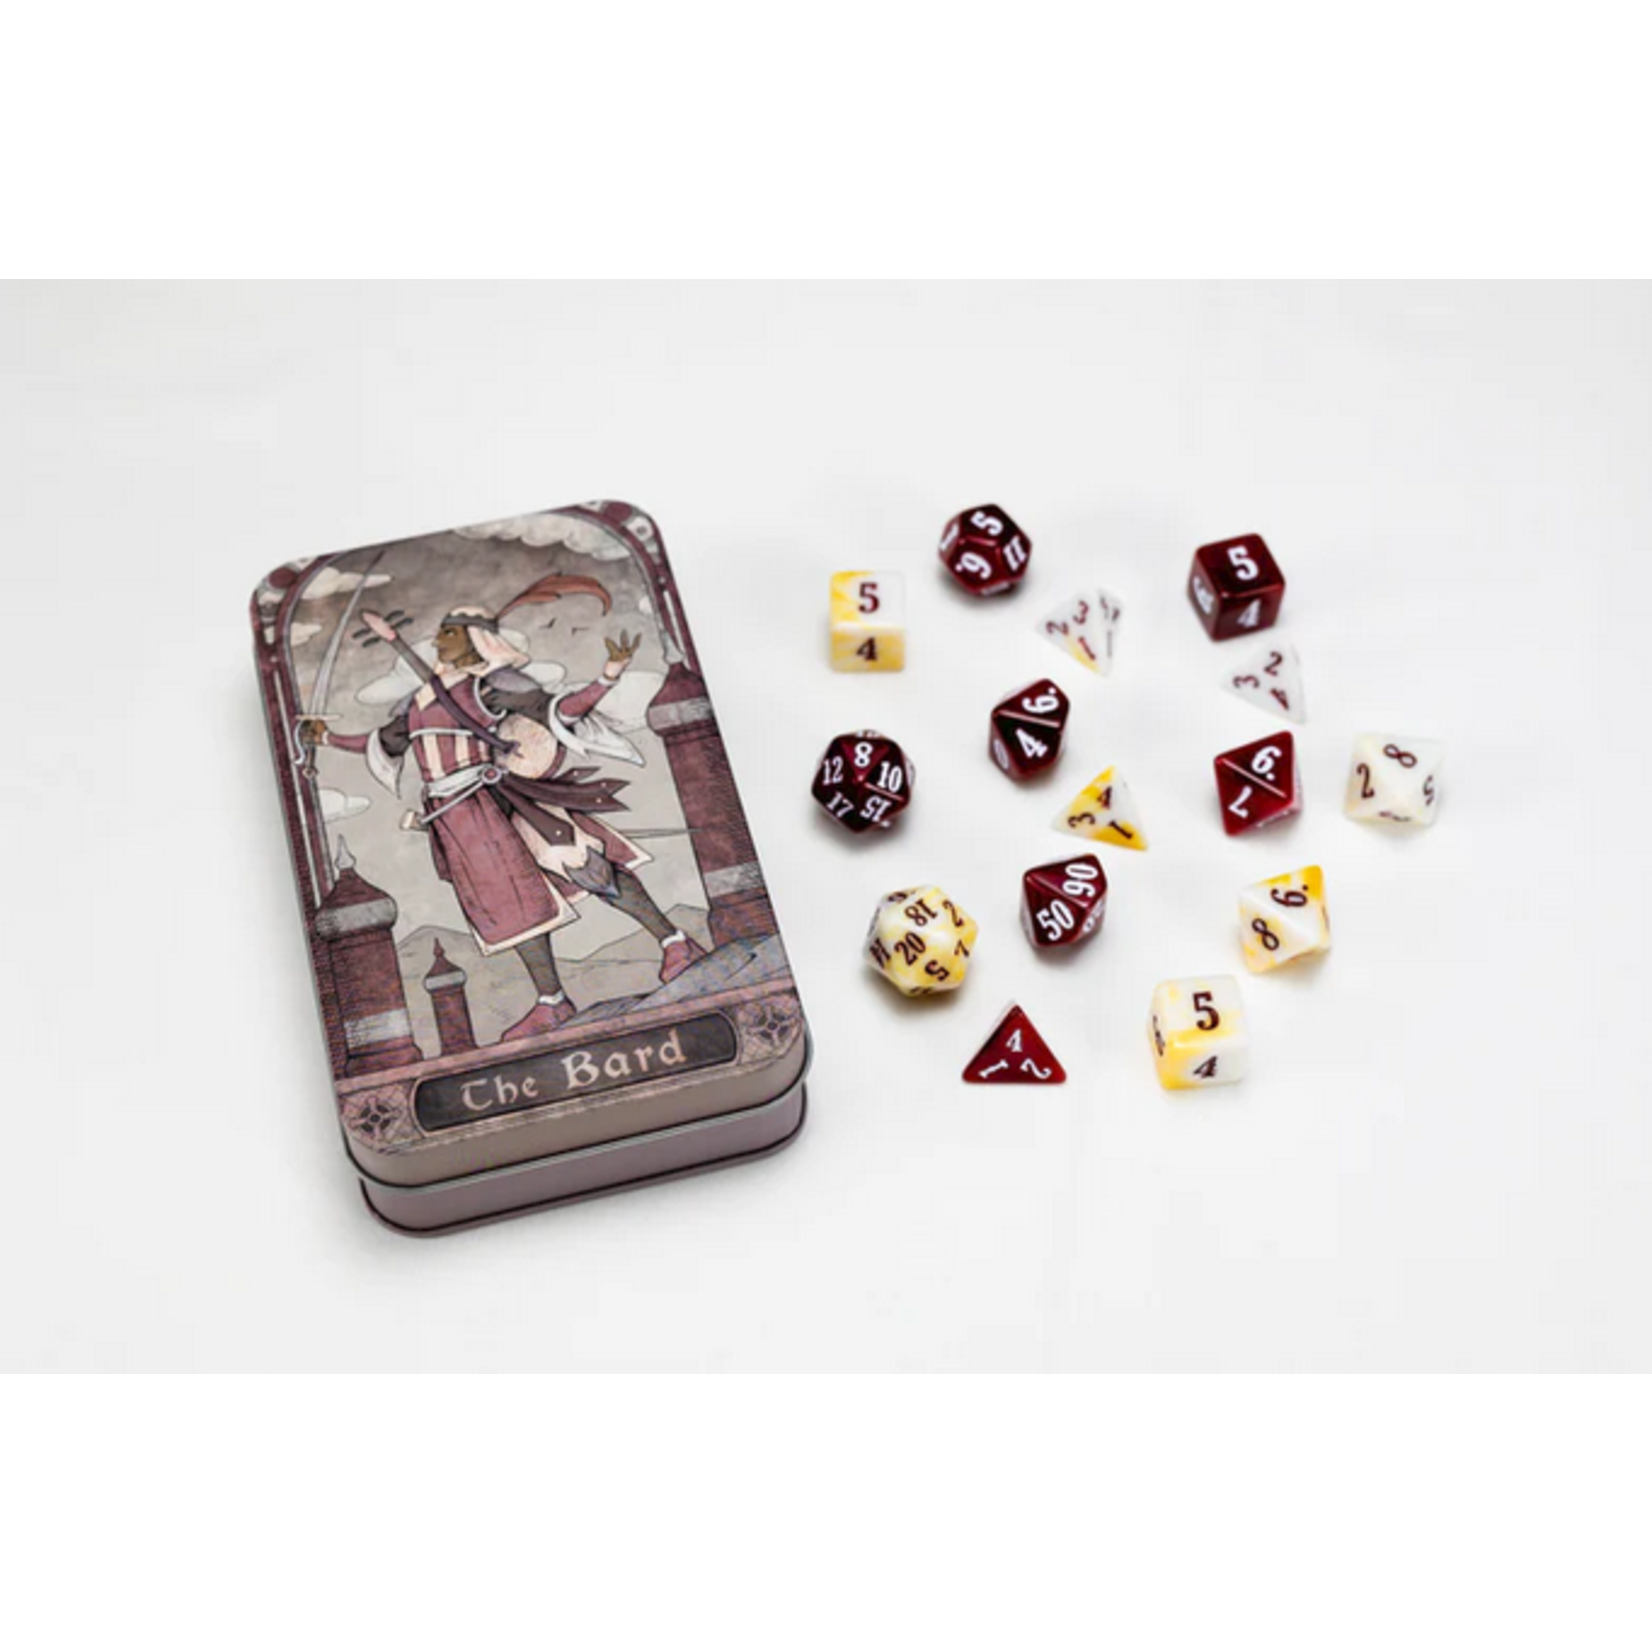 Beadle & Grimm Beadle & Grimm Character Dice: Bard